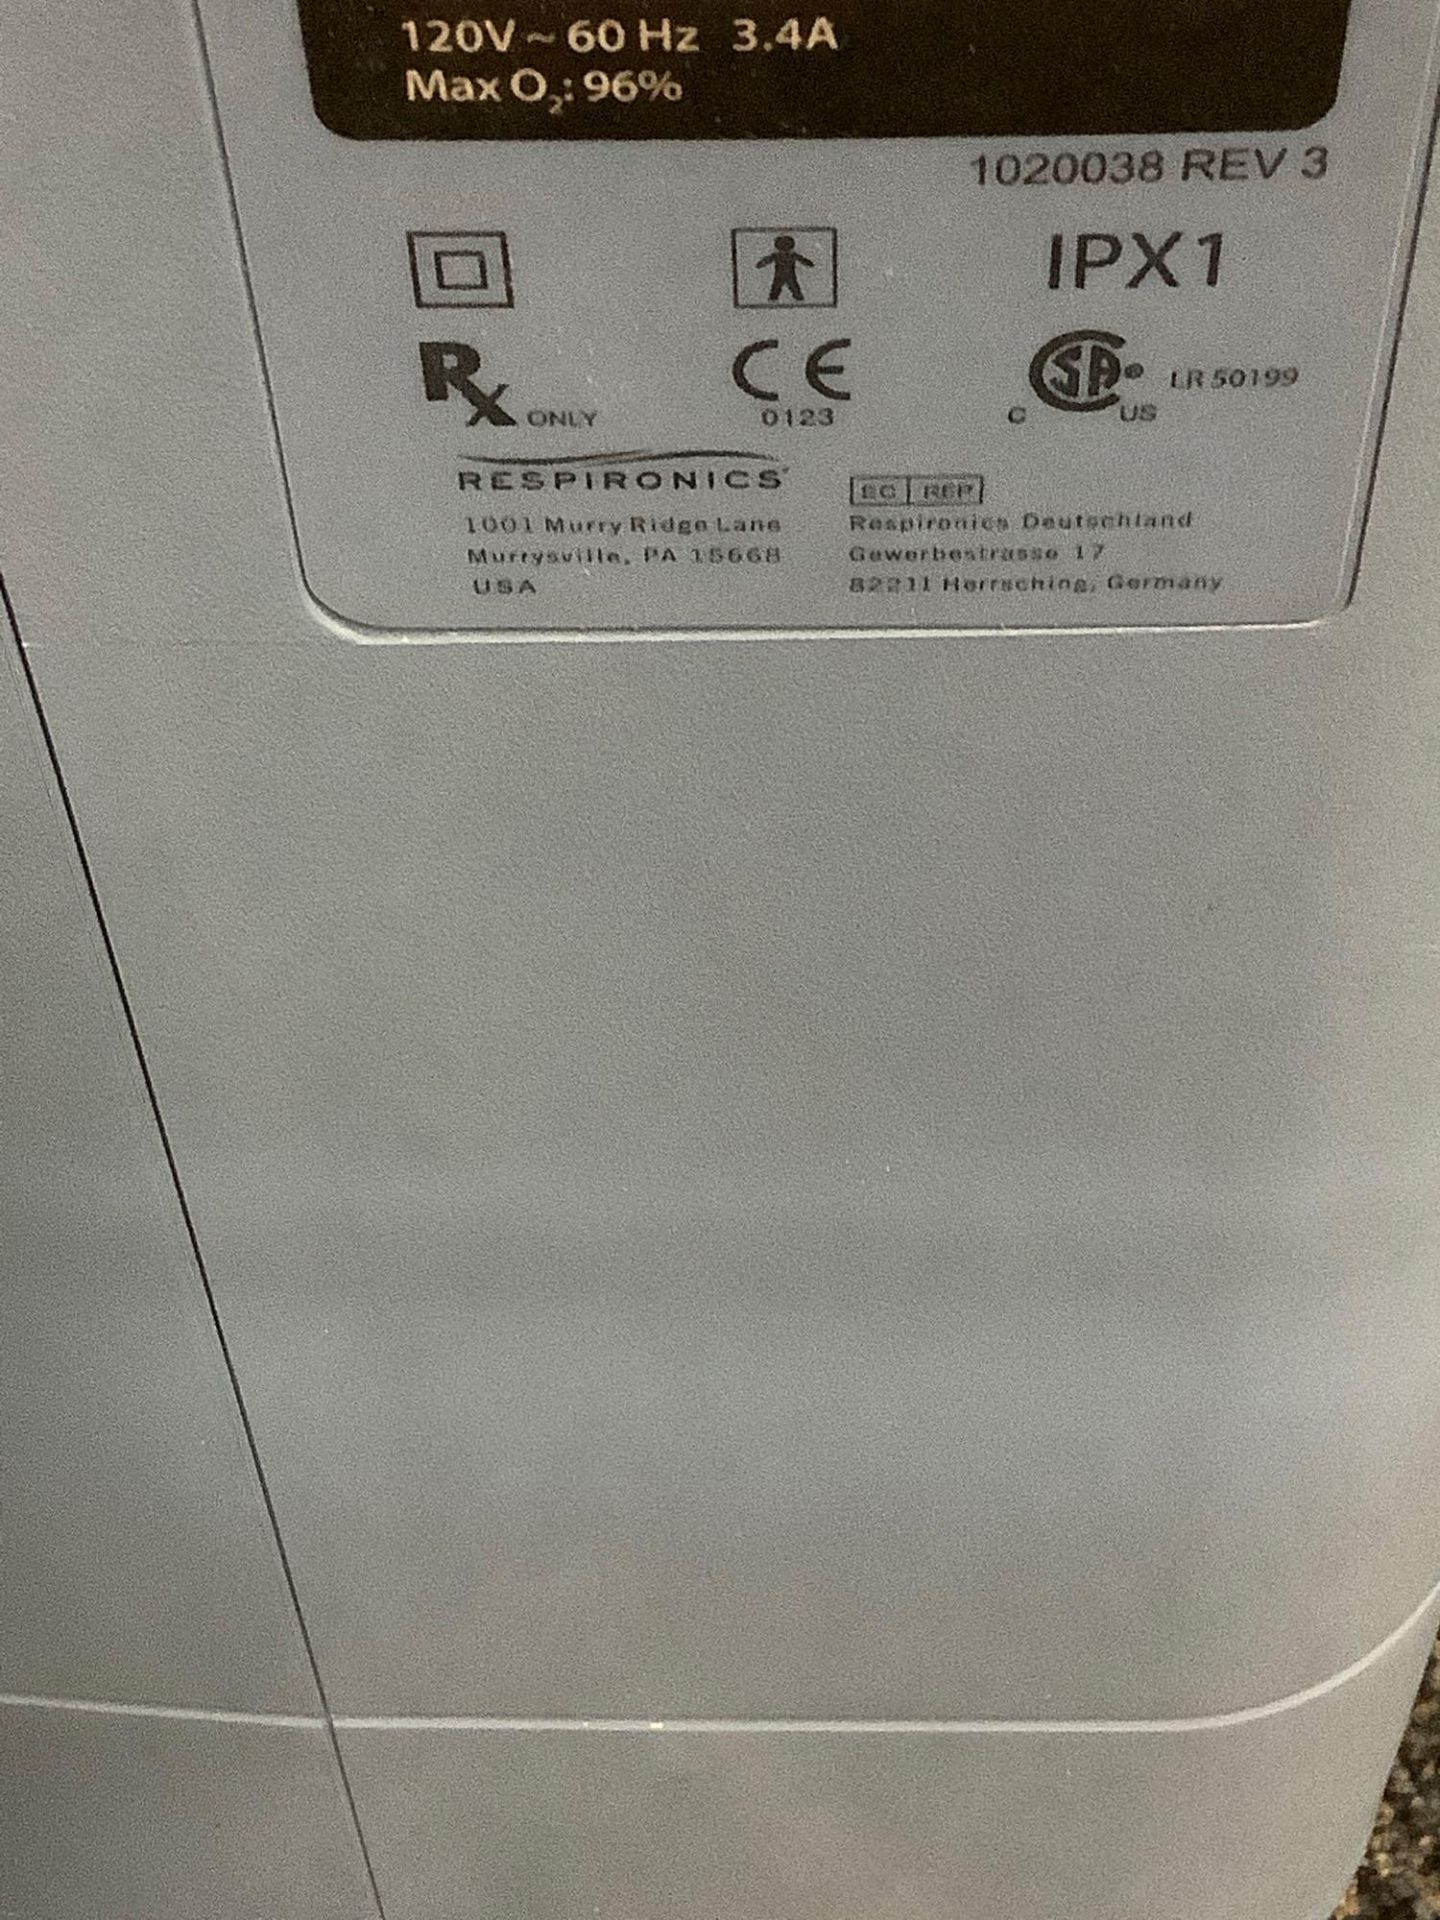 RESPIRONICS EVERFLO I OPI OXYGEN CONCENTRATOR, APPROX 120VOLTS, APPROX MAX O2 96%, NEW HOSE INCLUDED - Image 5 of 6